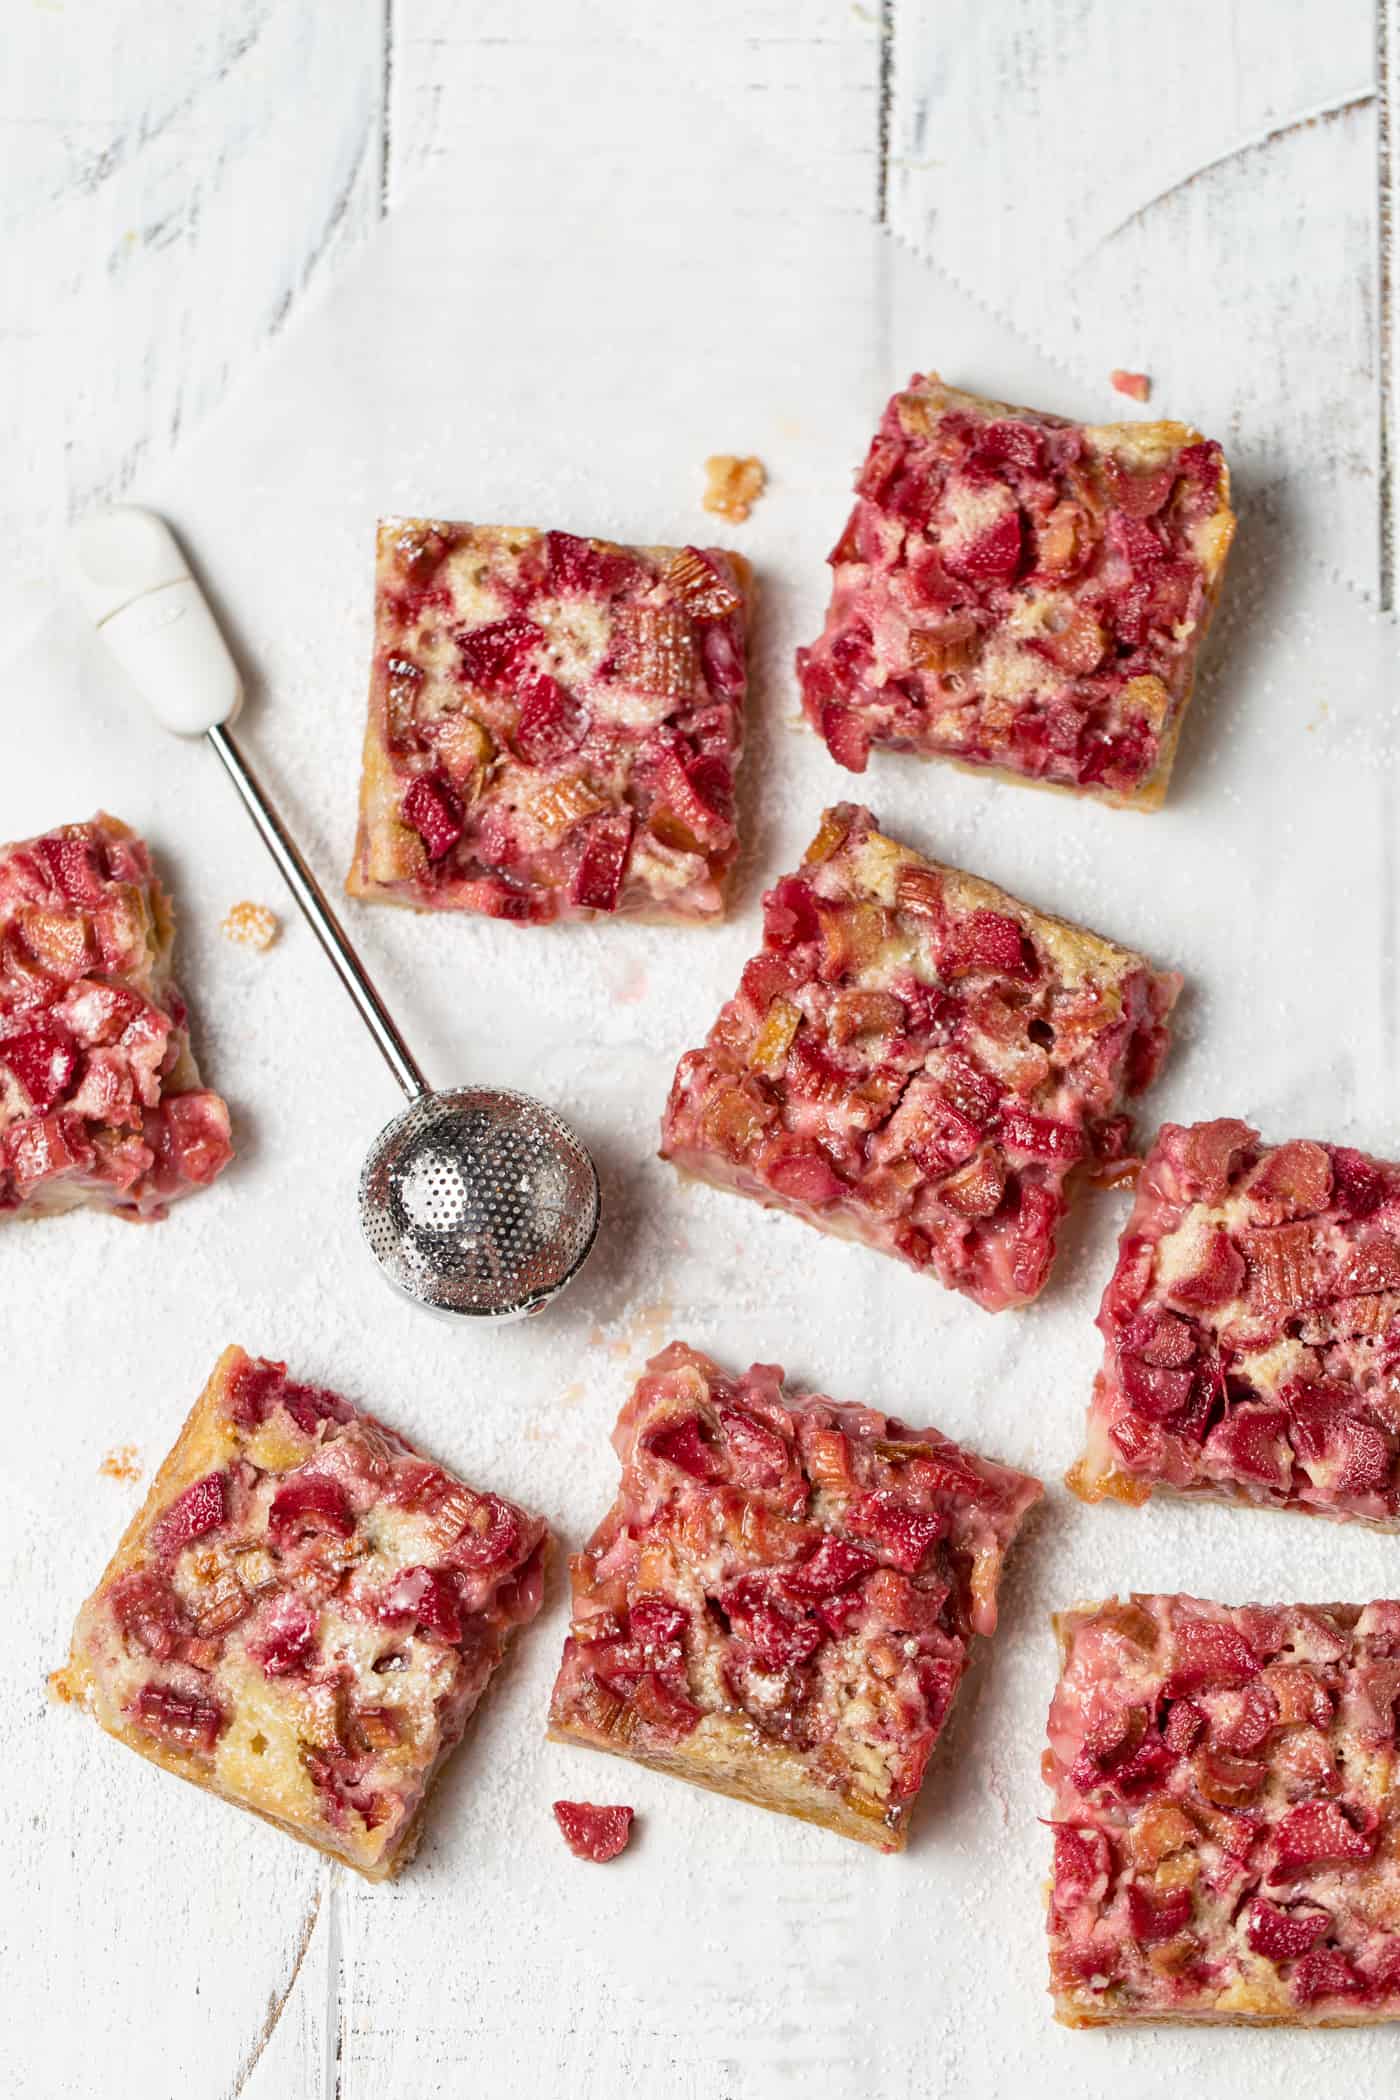 rhubarb bars cut into squares and scattered on a white background dusted with powder sugar.